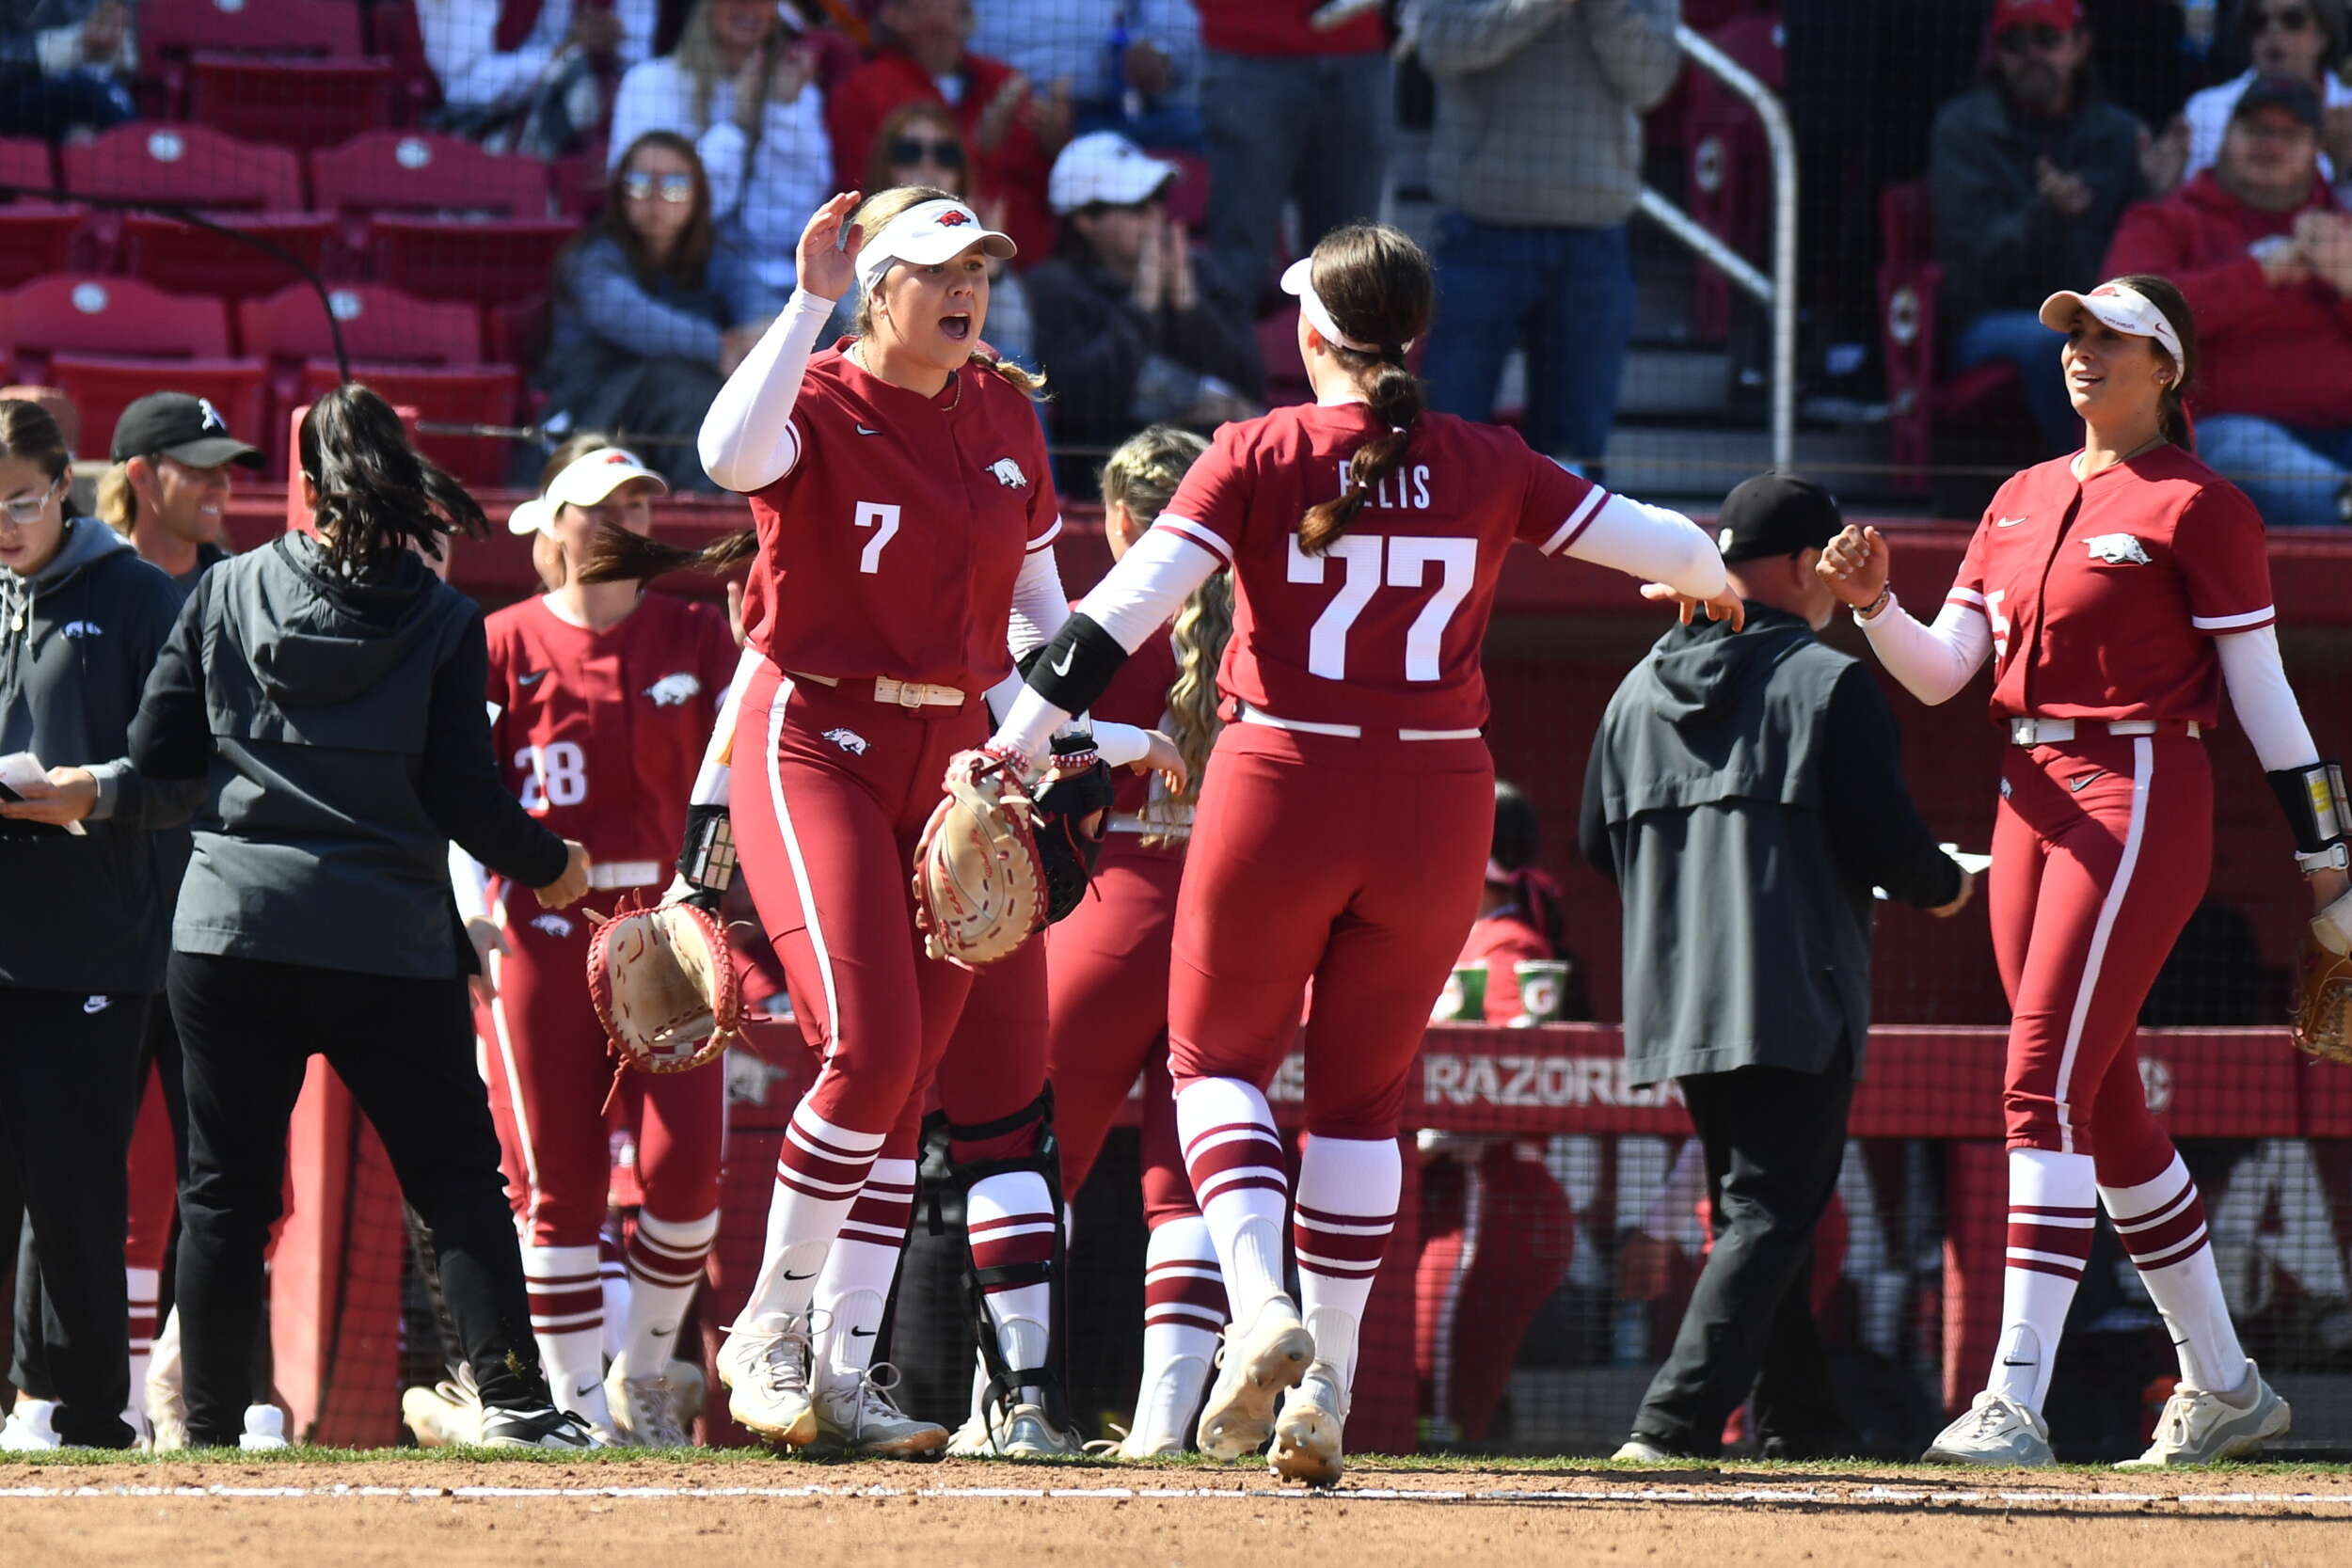 Camenzind, Leinstock Combine for Shutout to Even Series with #20 Mississippi State